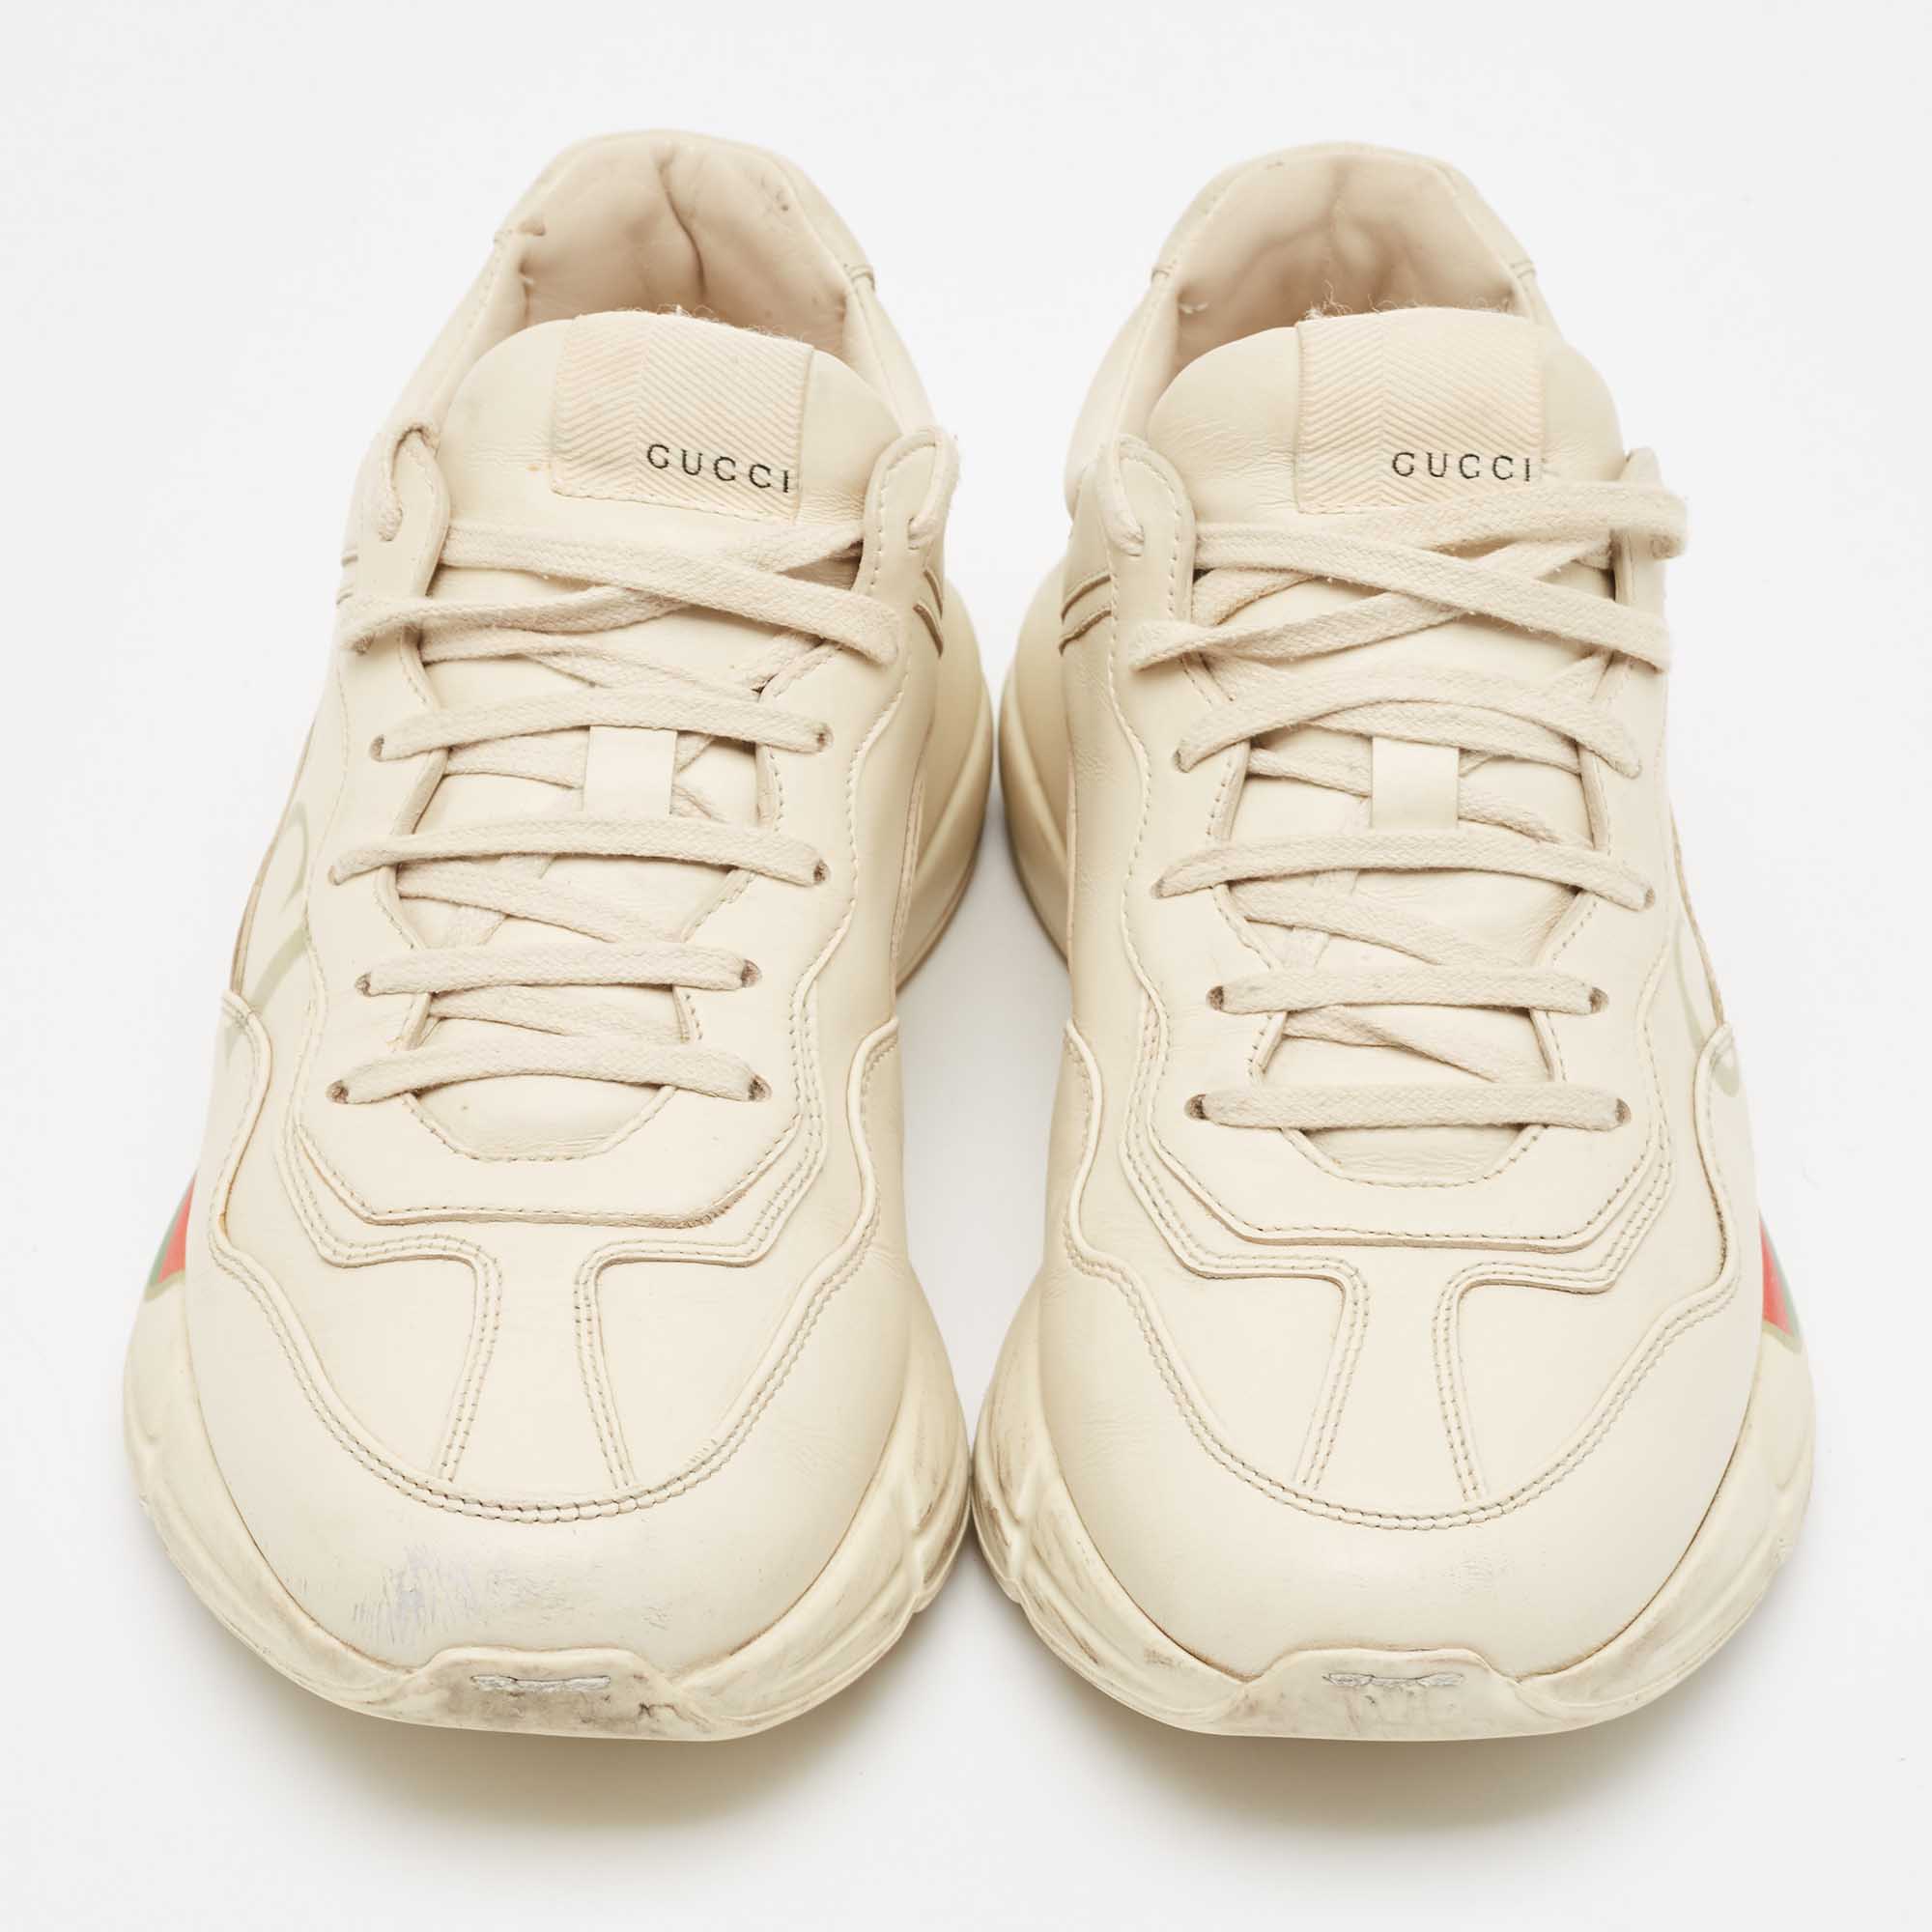 Gucci Cream Leather Rhyton Sneakers Size 41